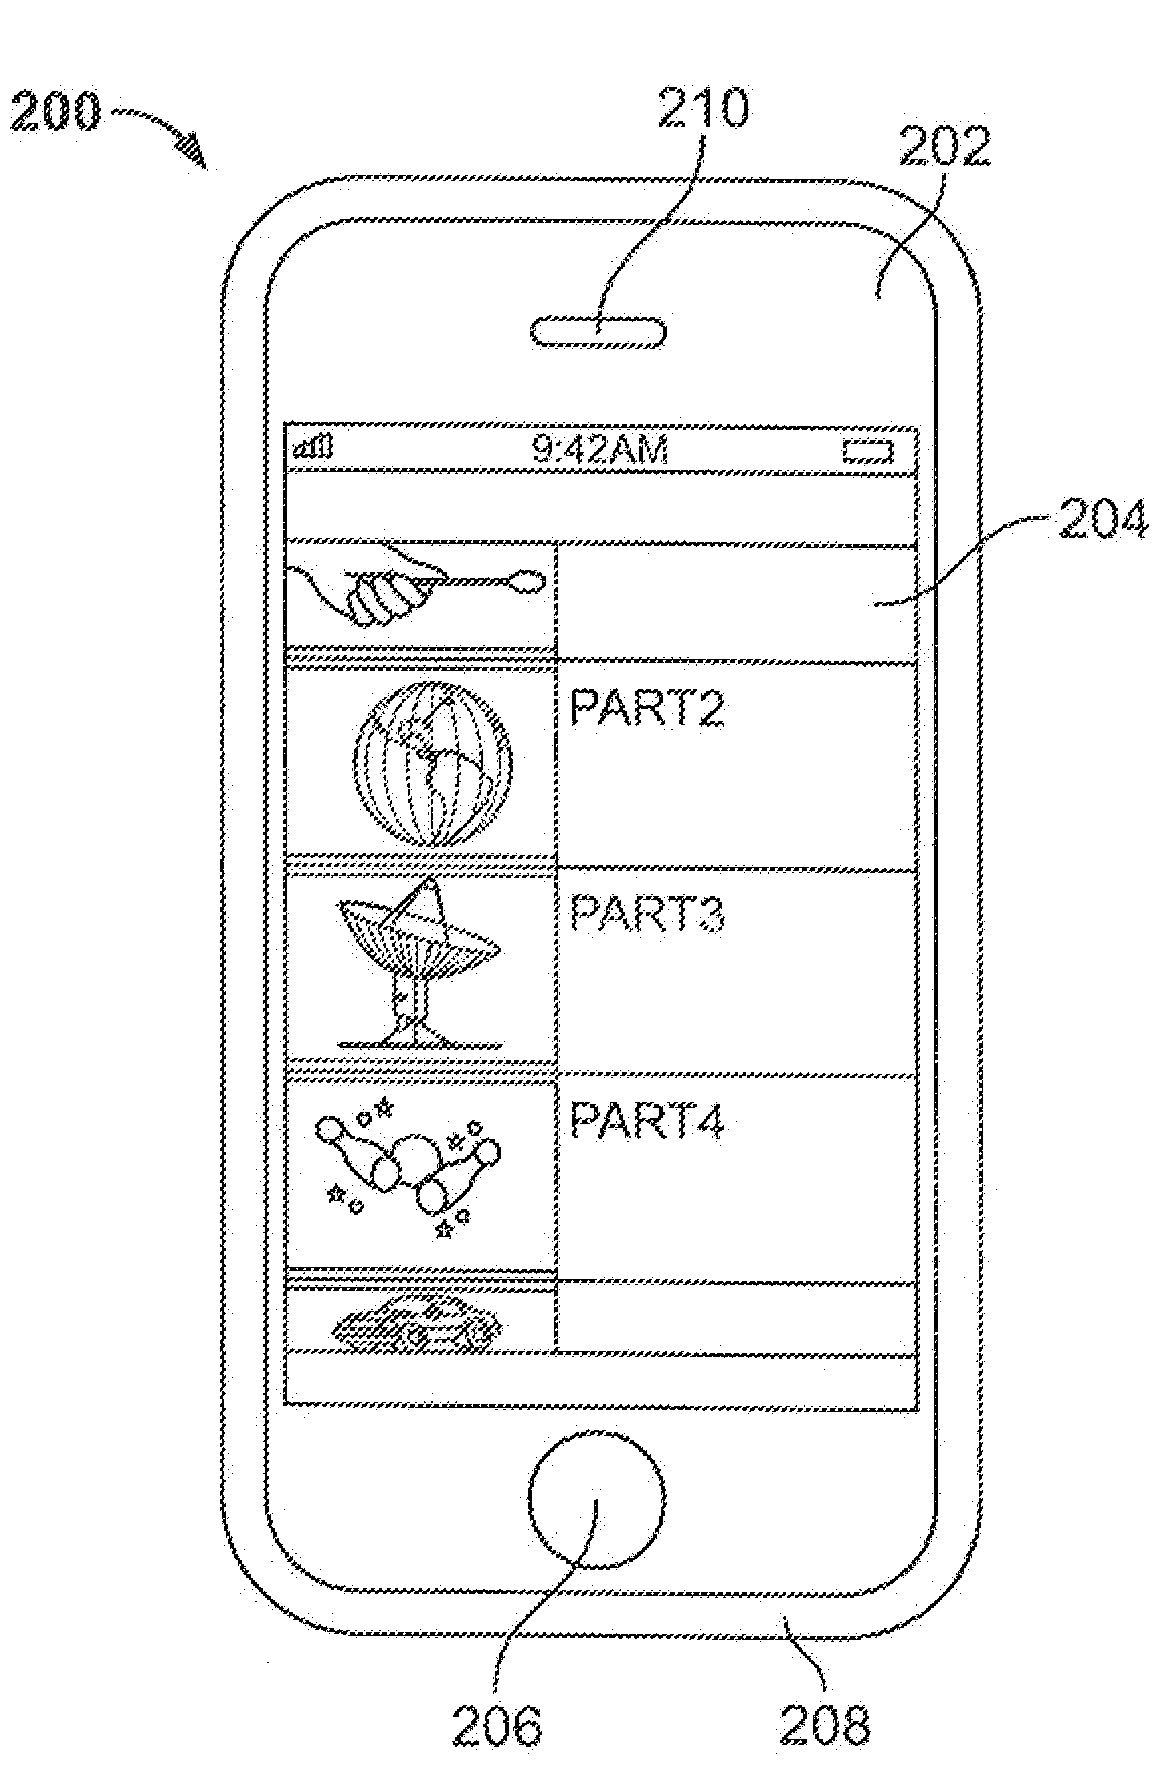 Tactile feedback in an electronic device